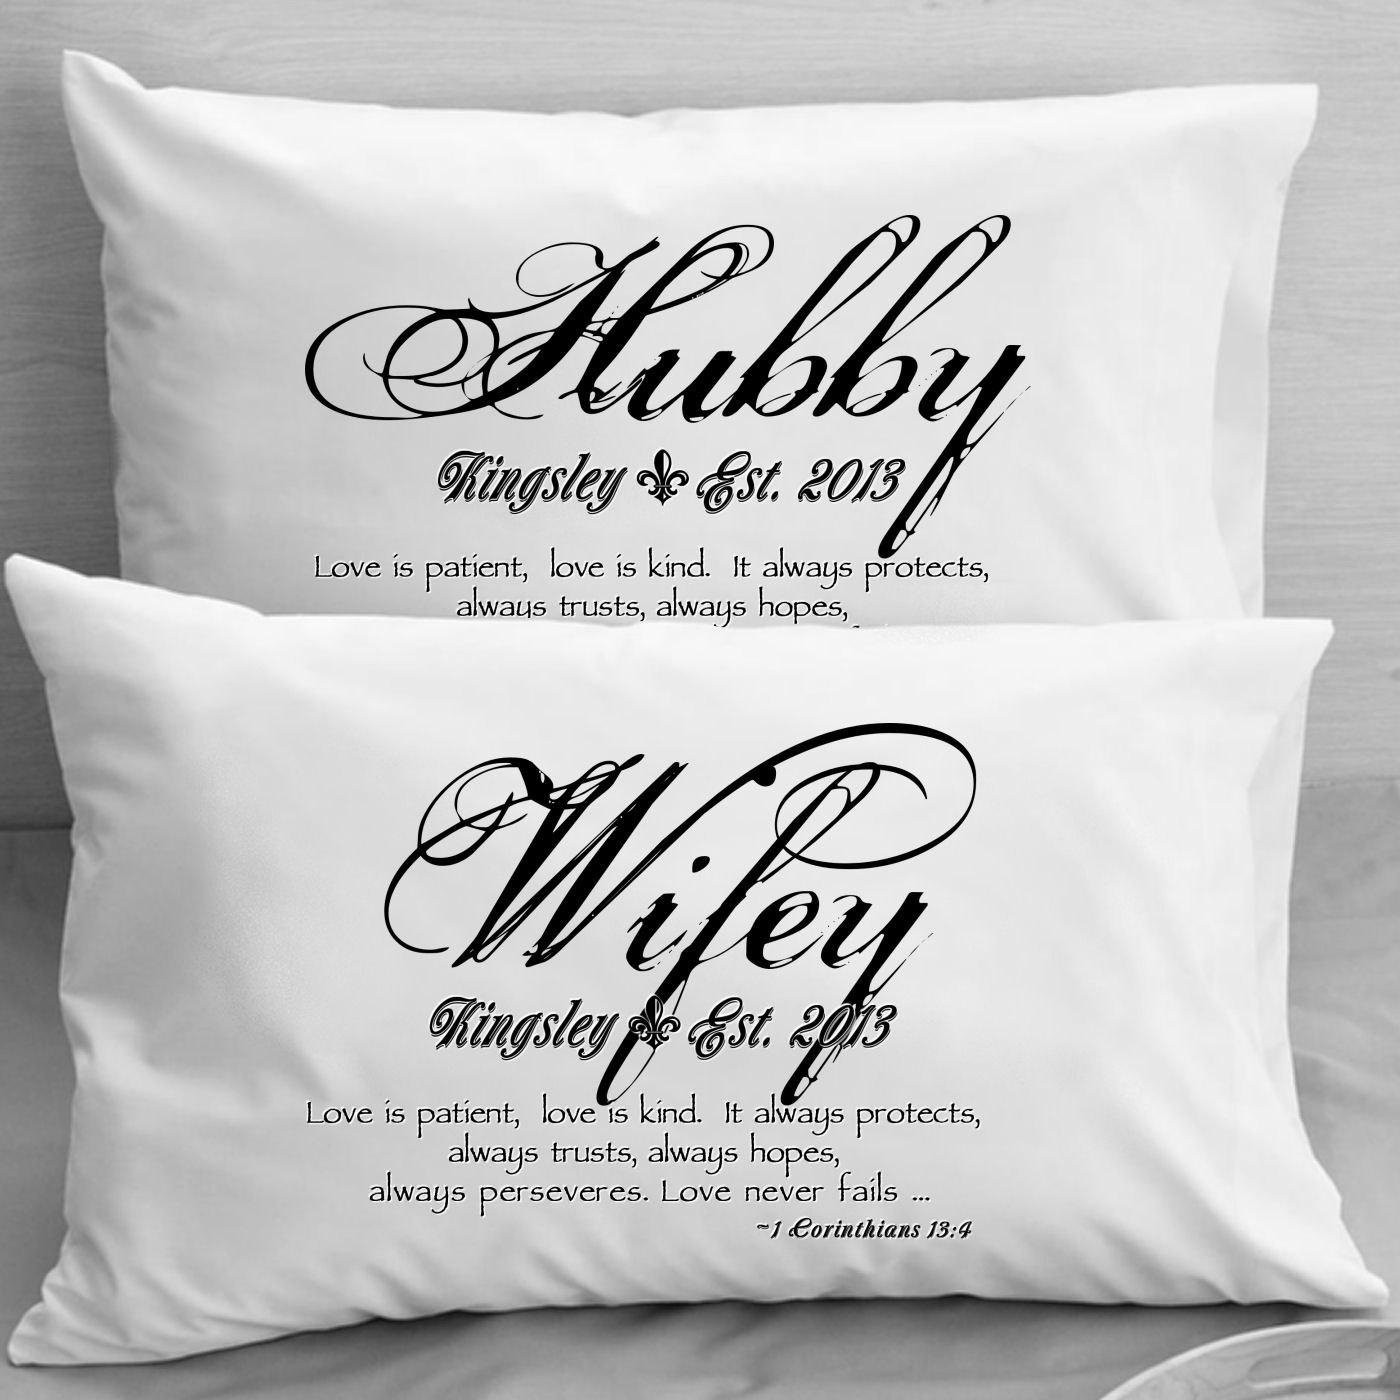 Wedding Anniversary Gift Ideas For Couple
 10 Lovable Ideas For 20Th Wedding Anniversary 2020